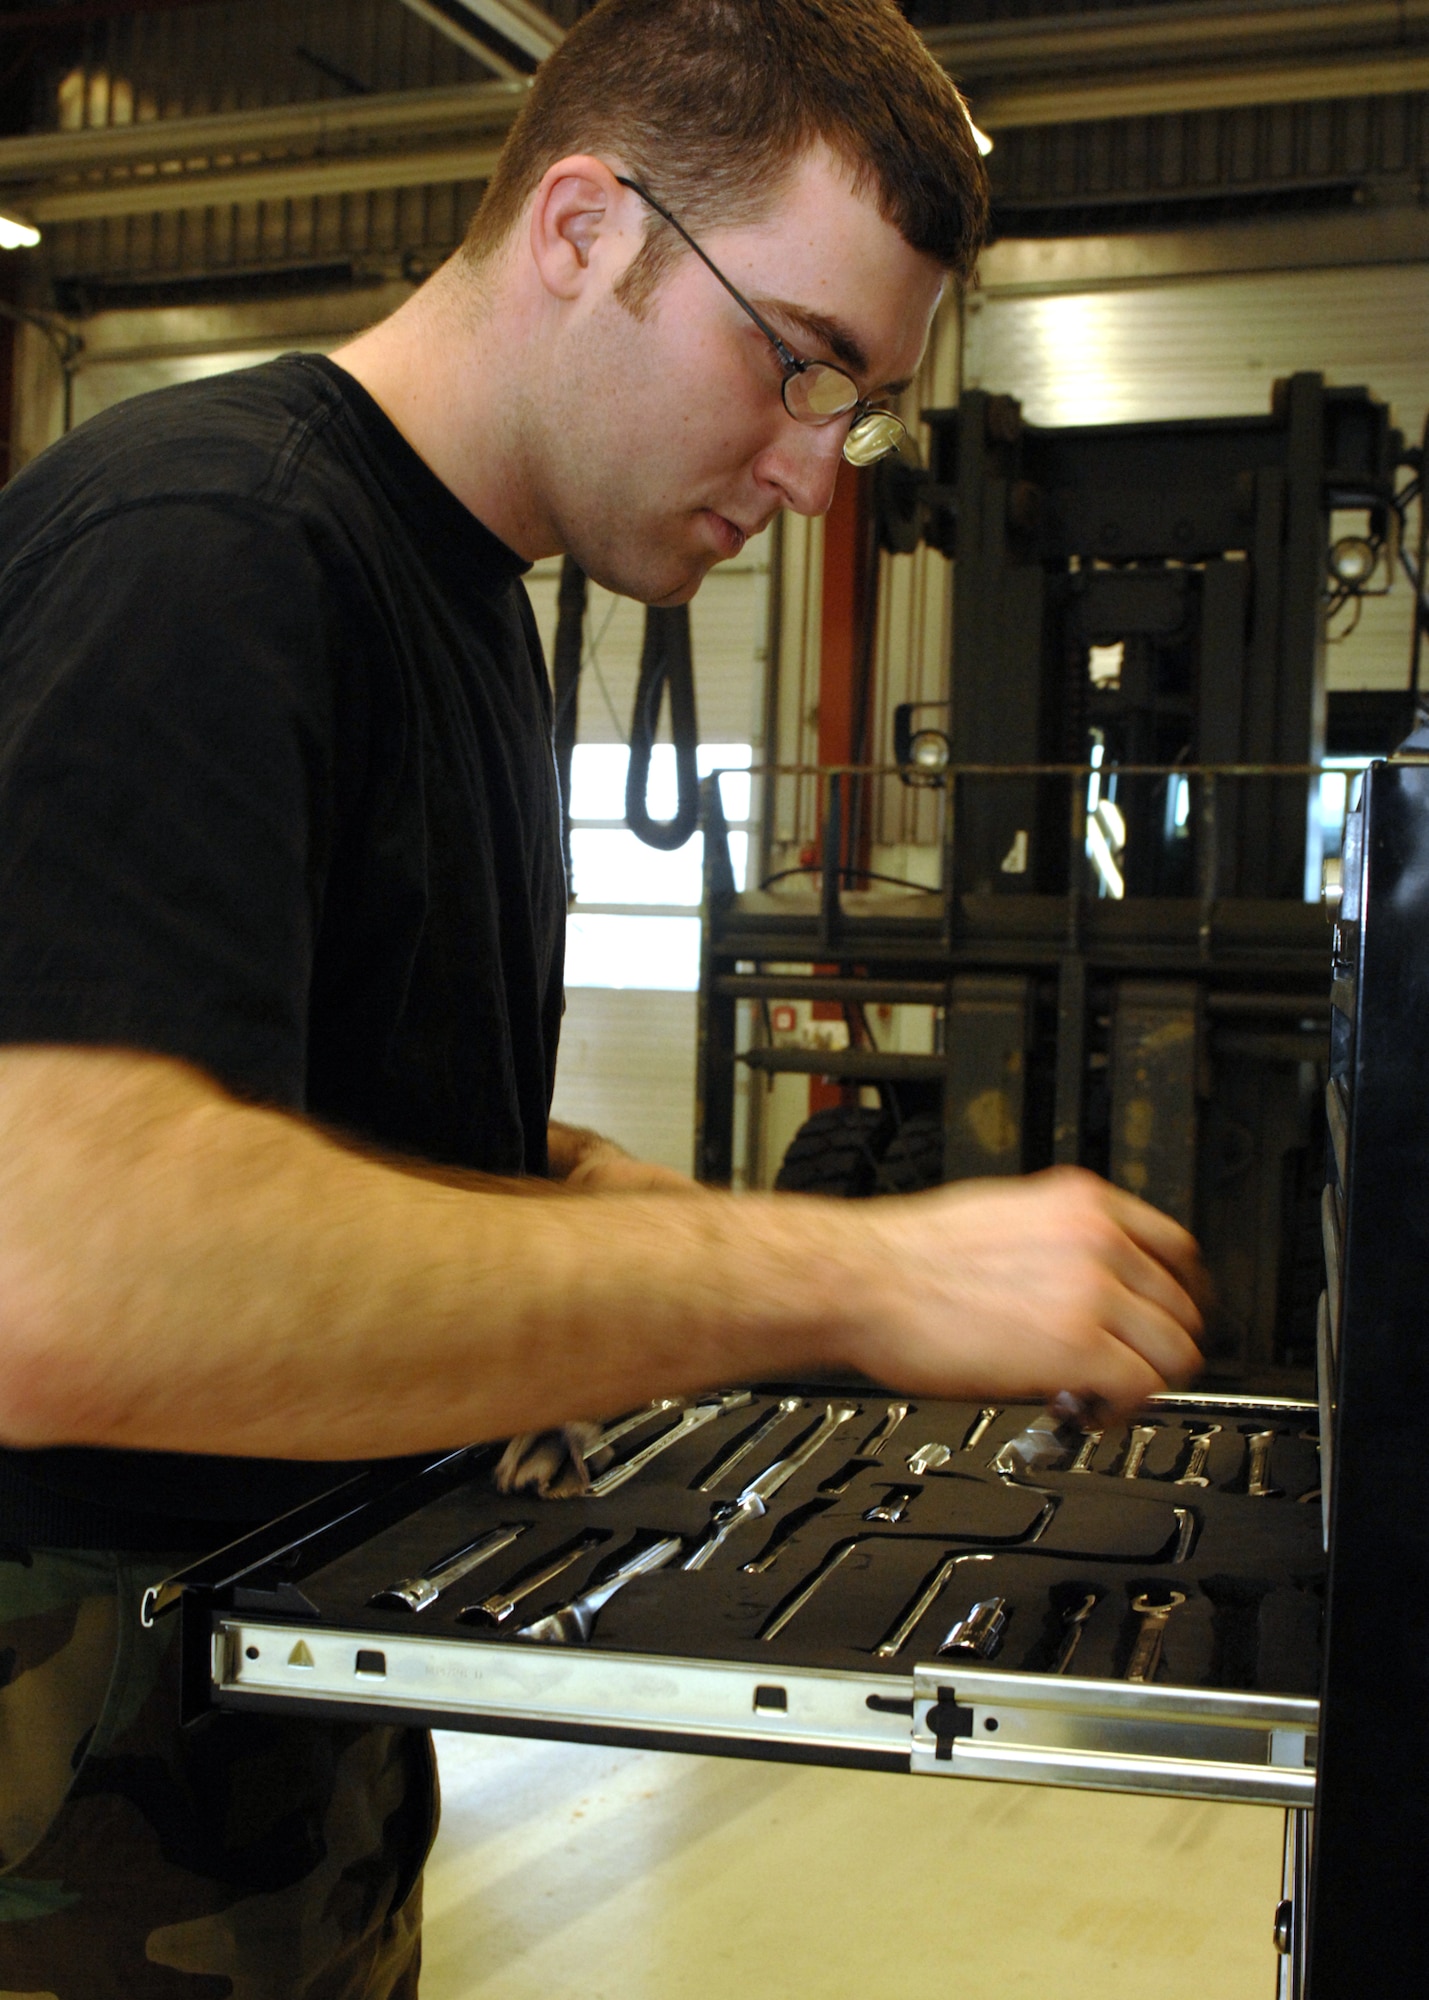 SPANGDAHLEM AIR BASE, Germany --Airman 1st Class Christopher Boze, 52nd Logistics Readiness Squadron, takes care of his tools after working on a vehicle at the vehicle maintenance shop April 14, 2008.  (U.S Air Force photo/Airman 1st Class Jenifer Calhoun)